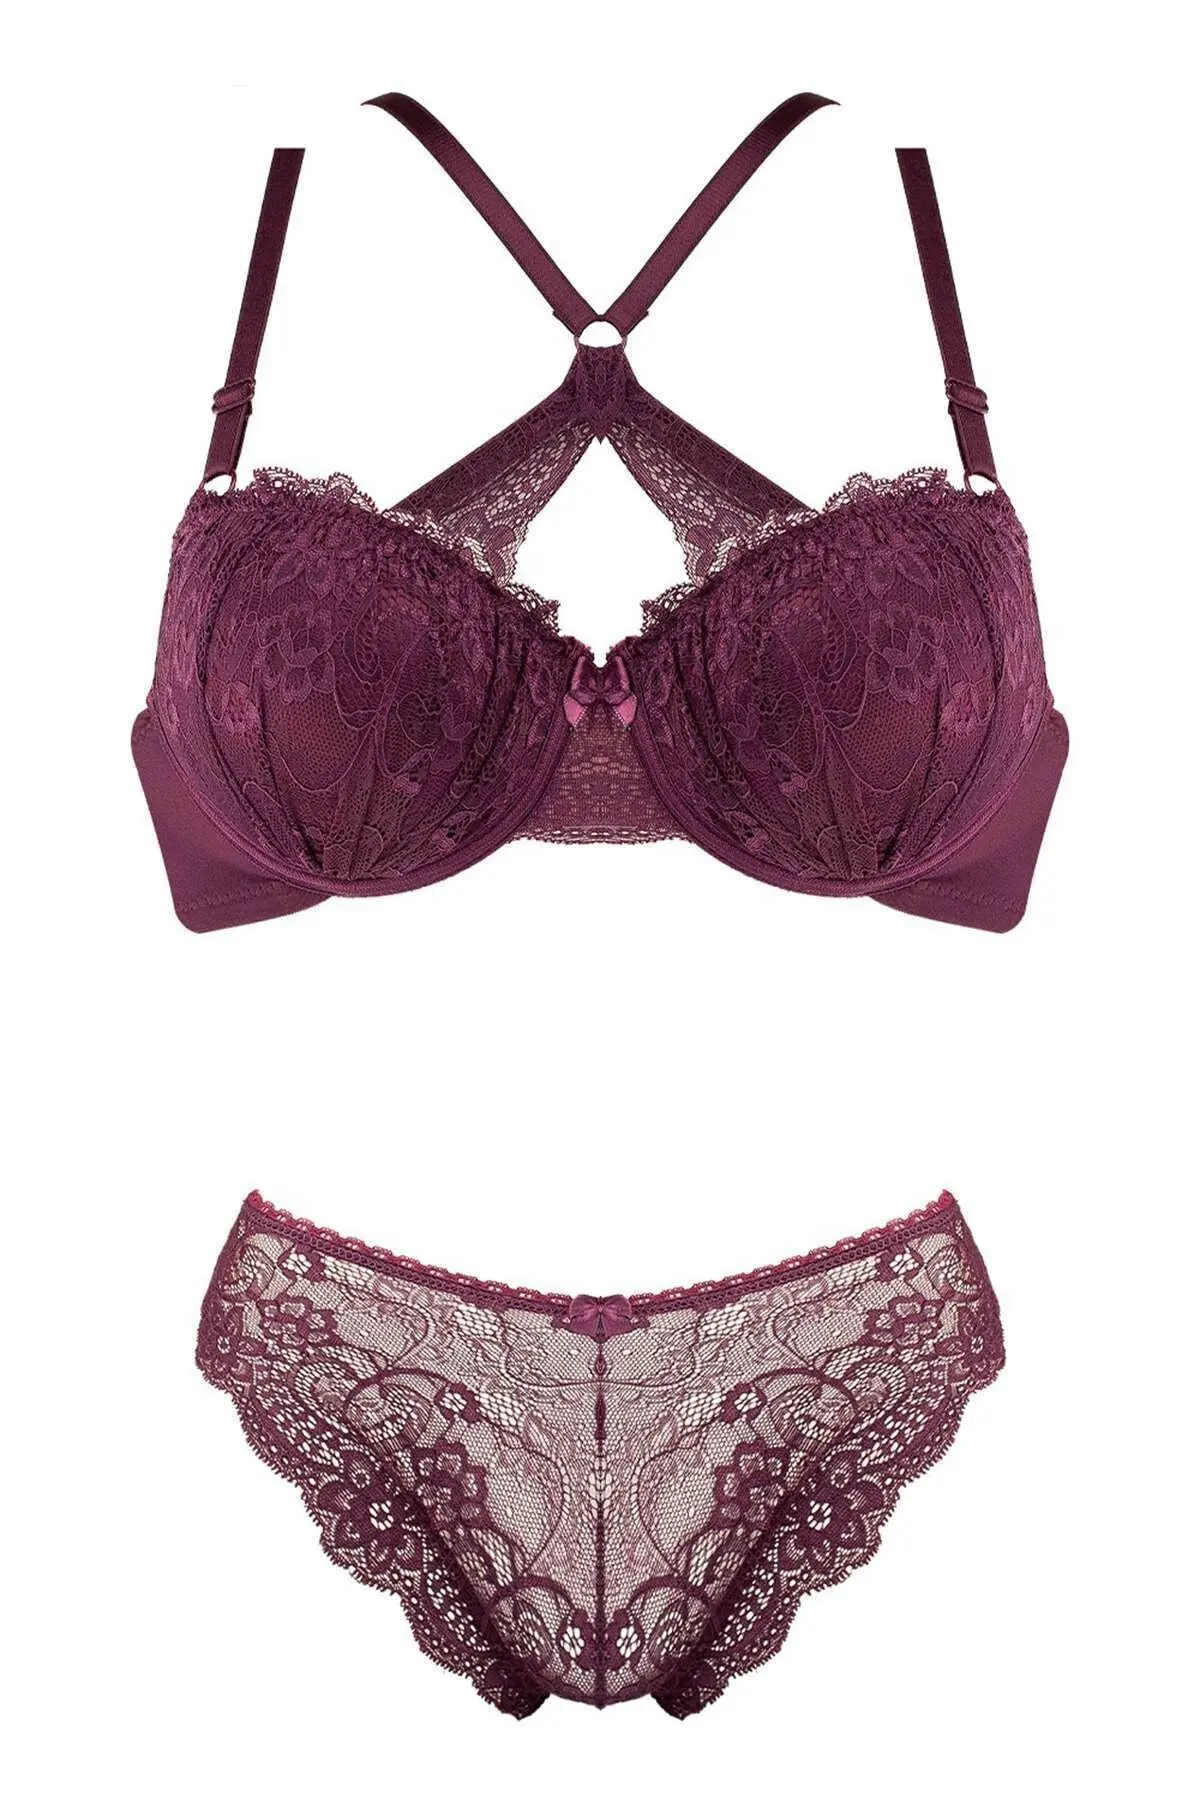 LOOK FOR YOUR WONDERFUL NIGHTS WITH ITS STUNNING COLOR Women's Women's Plum Back Lace Support Bra Set FREE SHIPPING